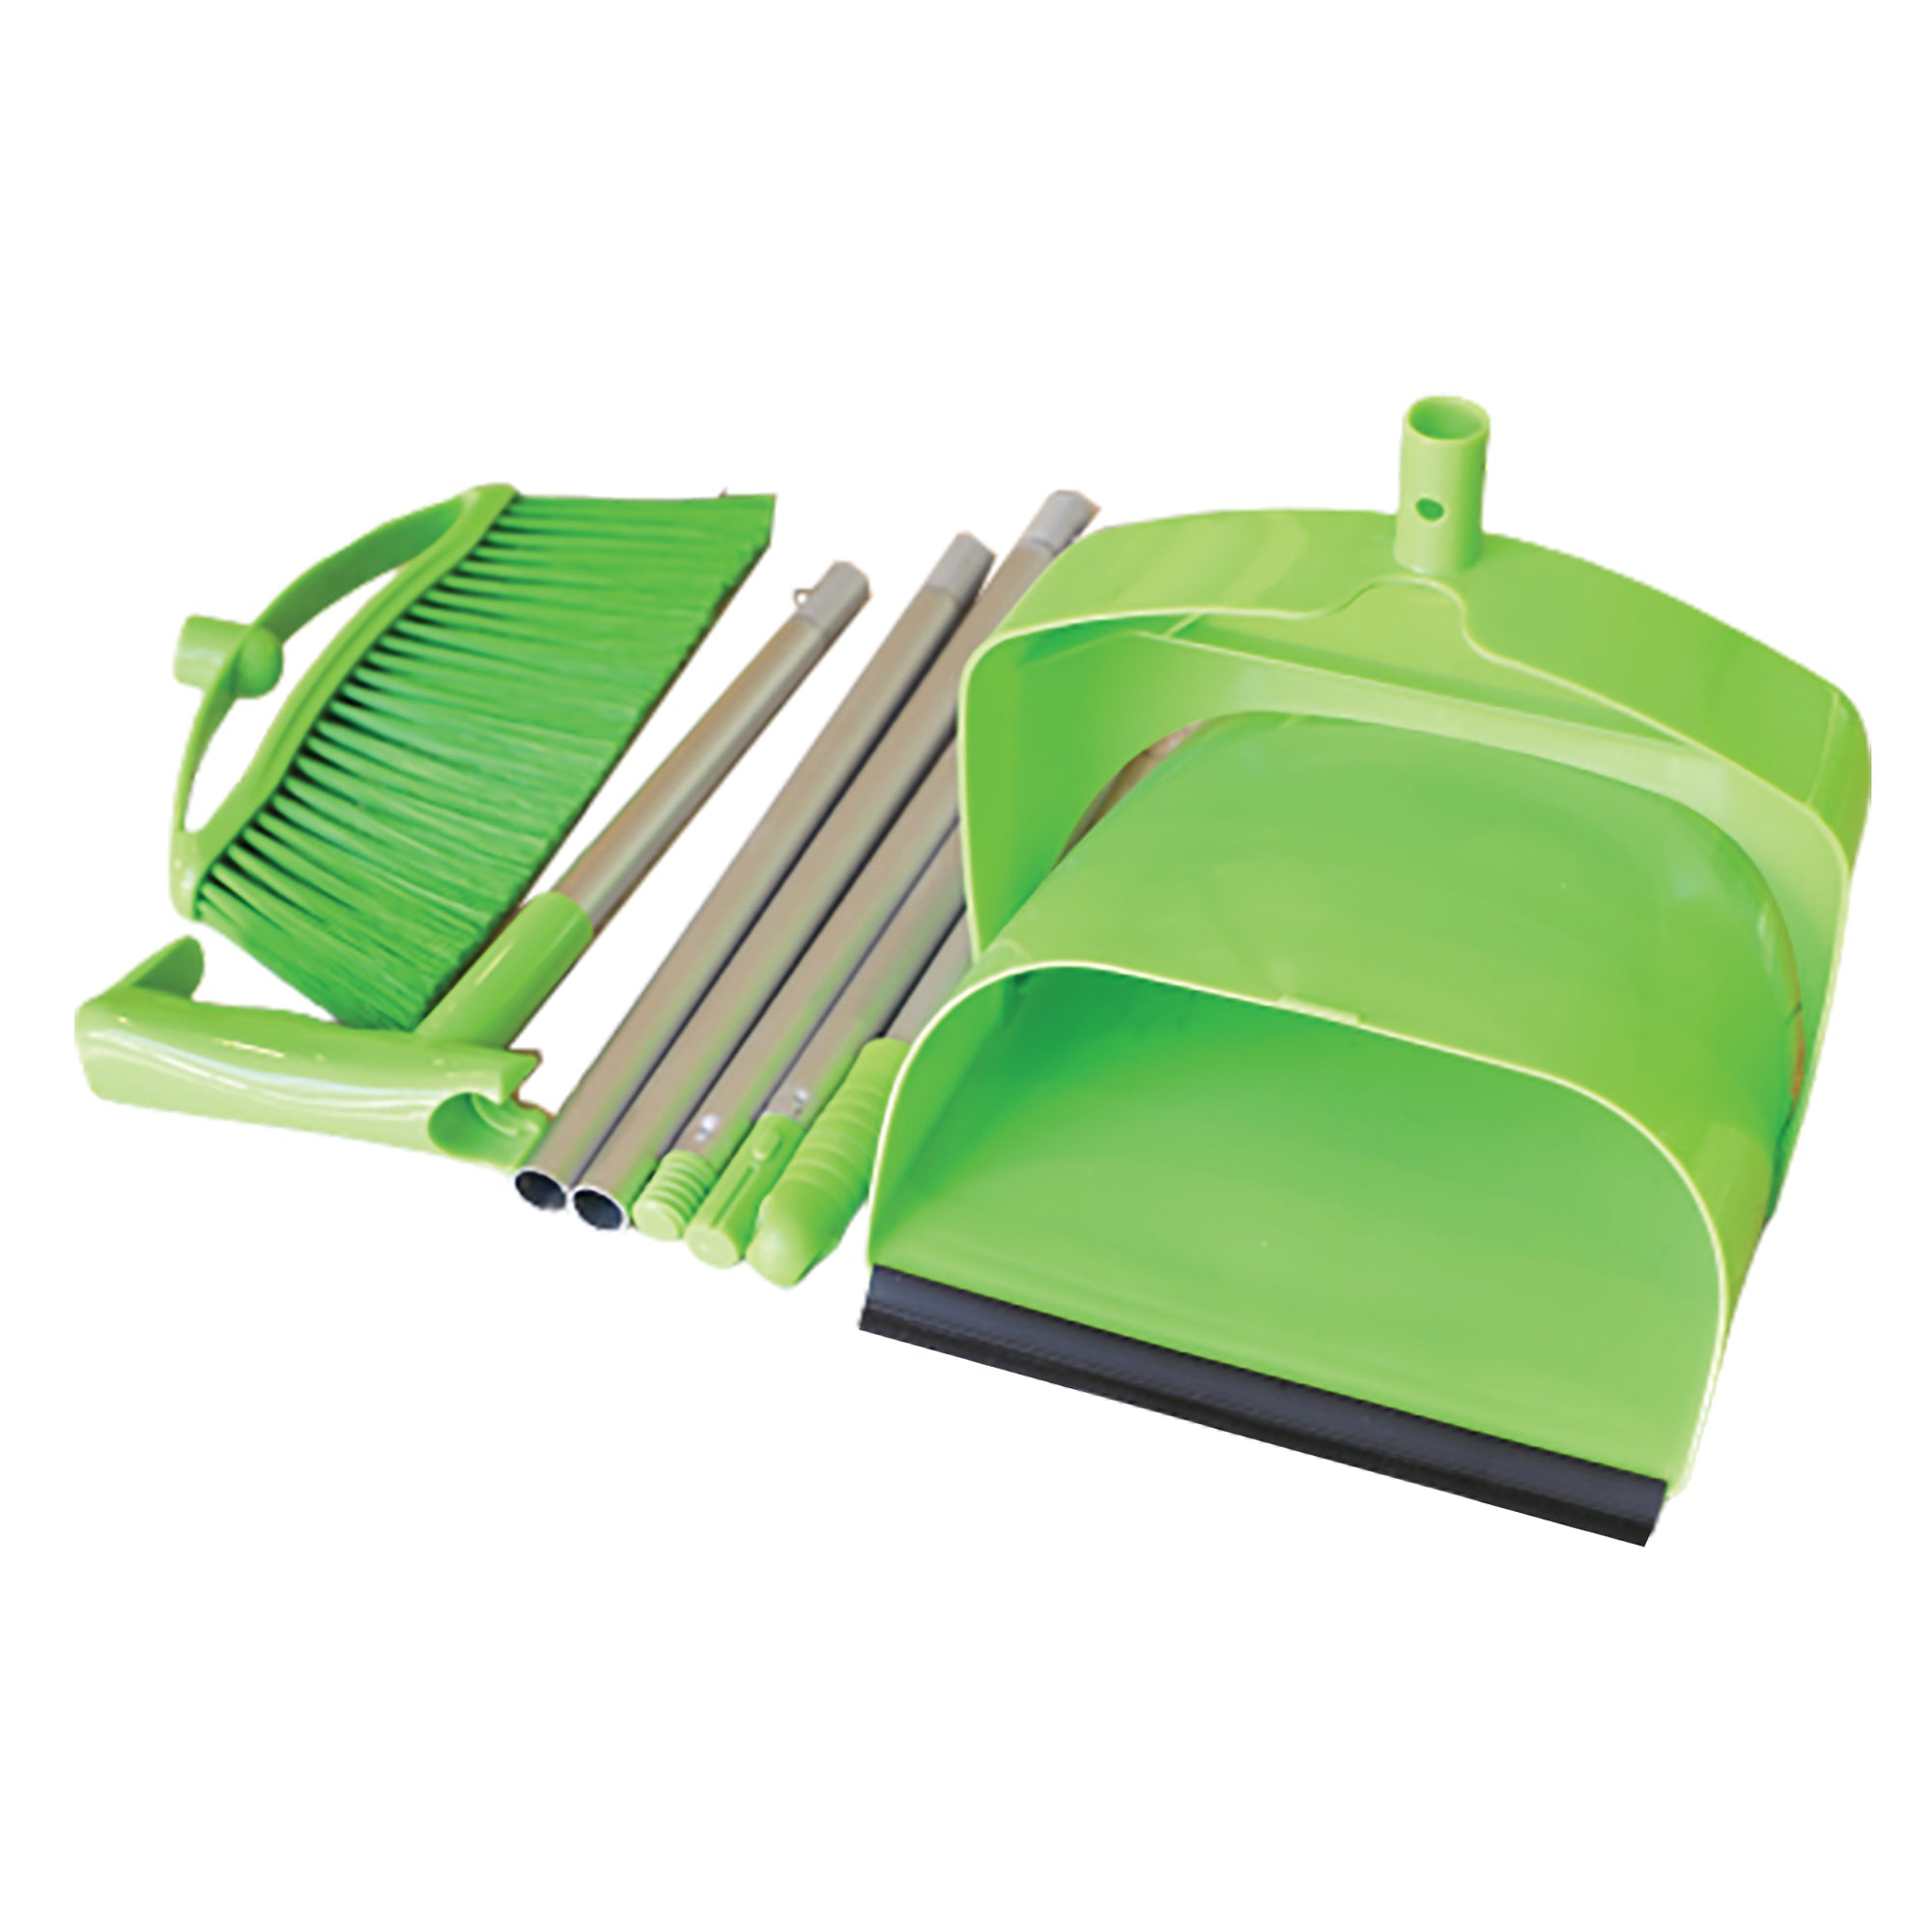 Household Broom And Dustpan Set With Upright Broom And Dustpan